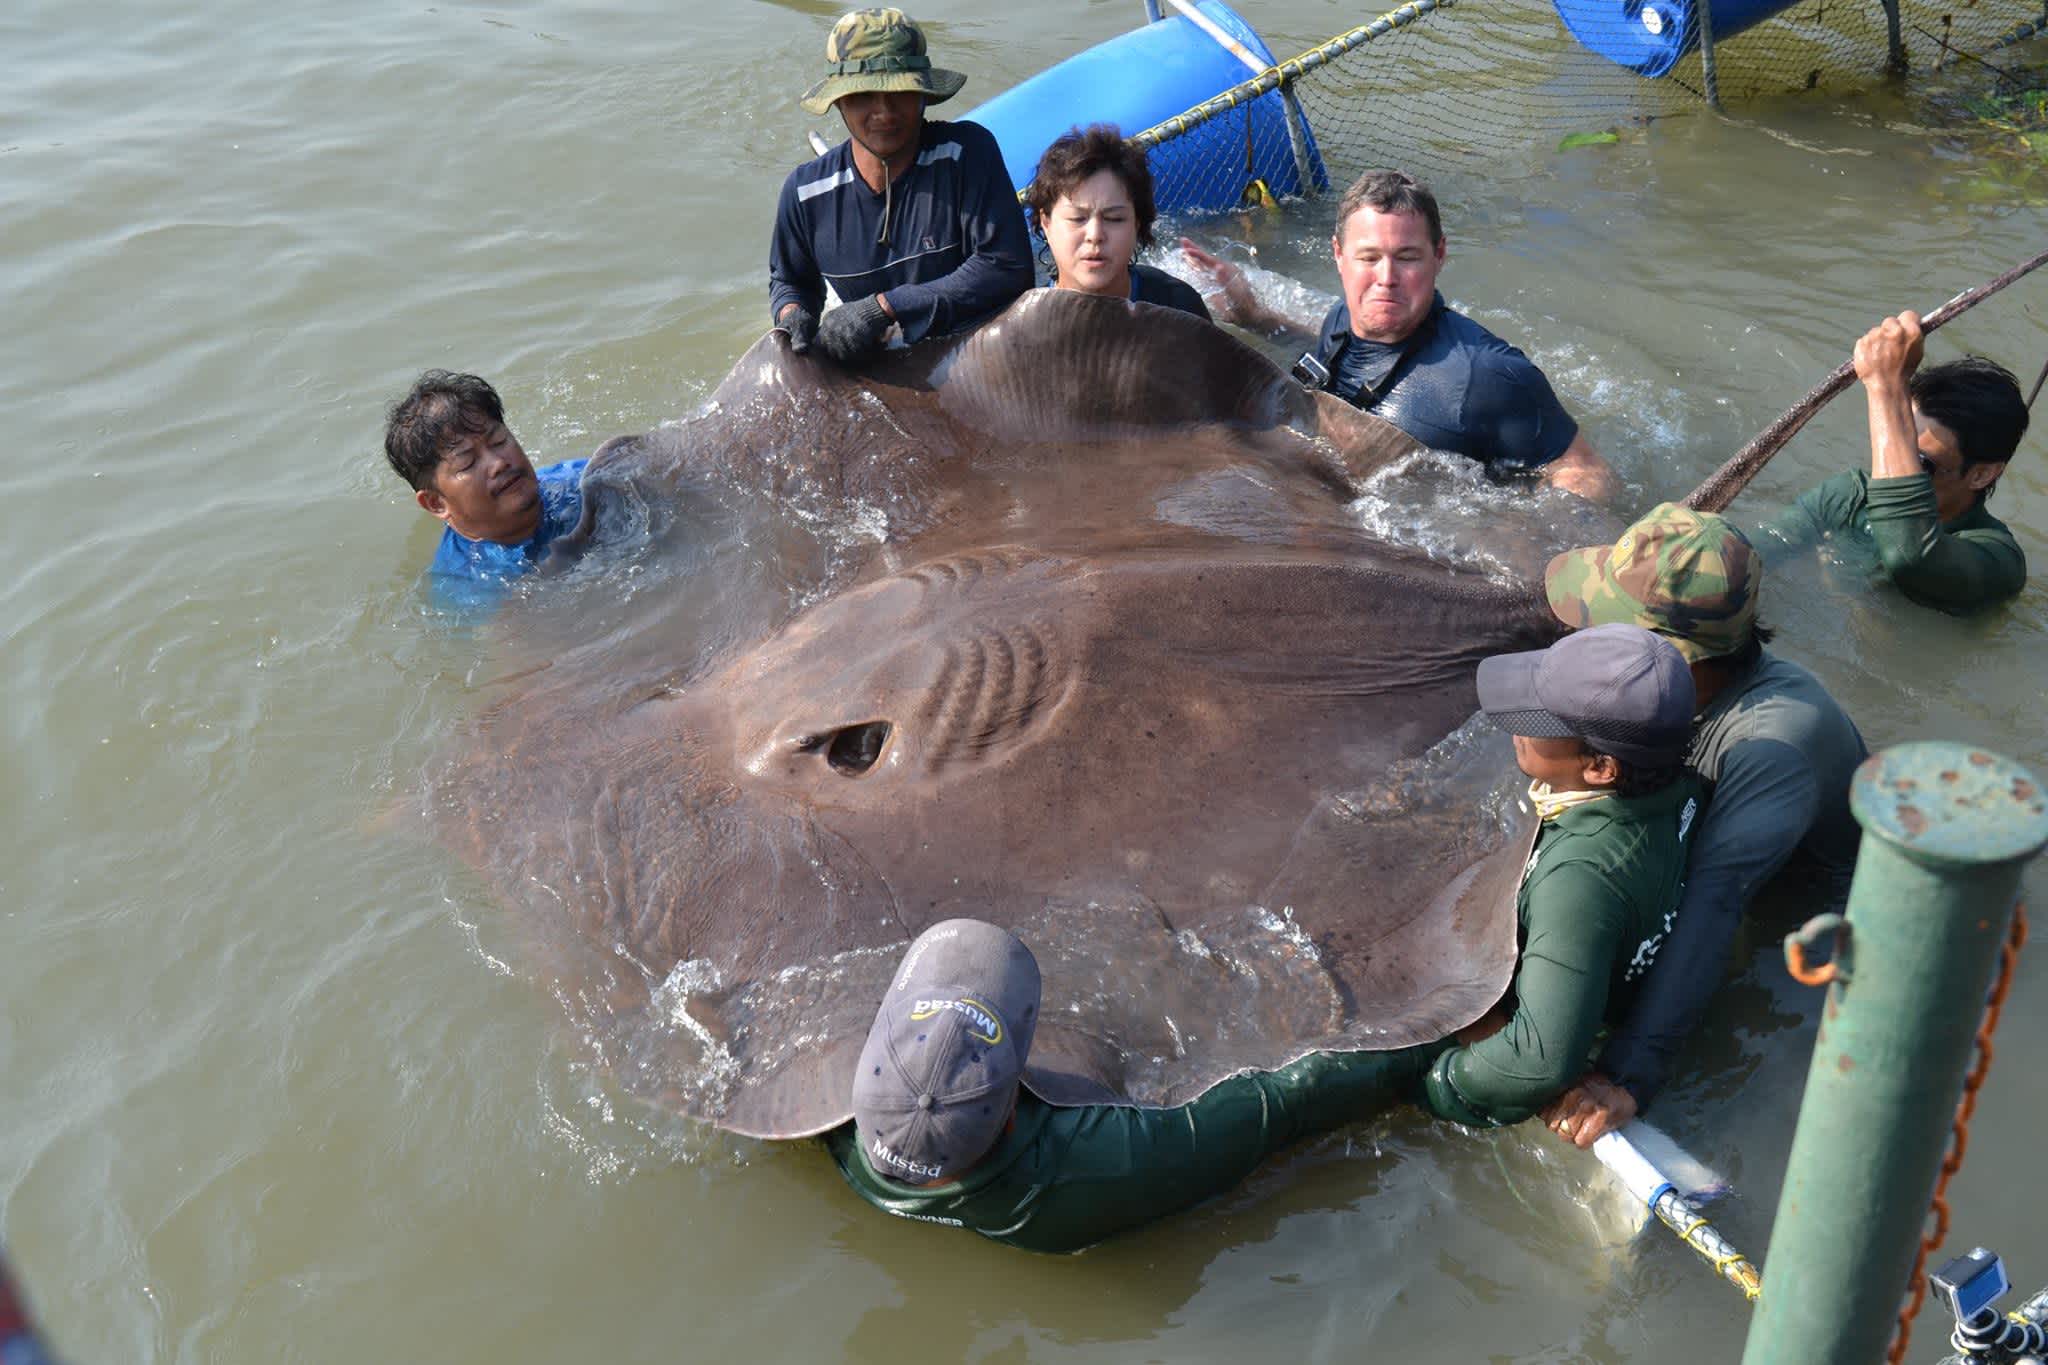 Trampoline-sized Stingray May Be Largest Freshwater Fish Ever Caught